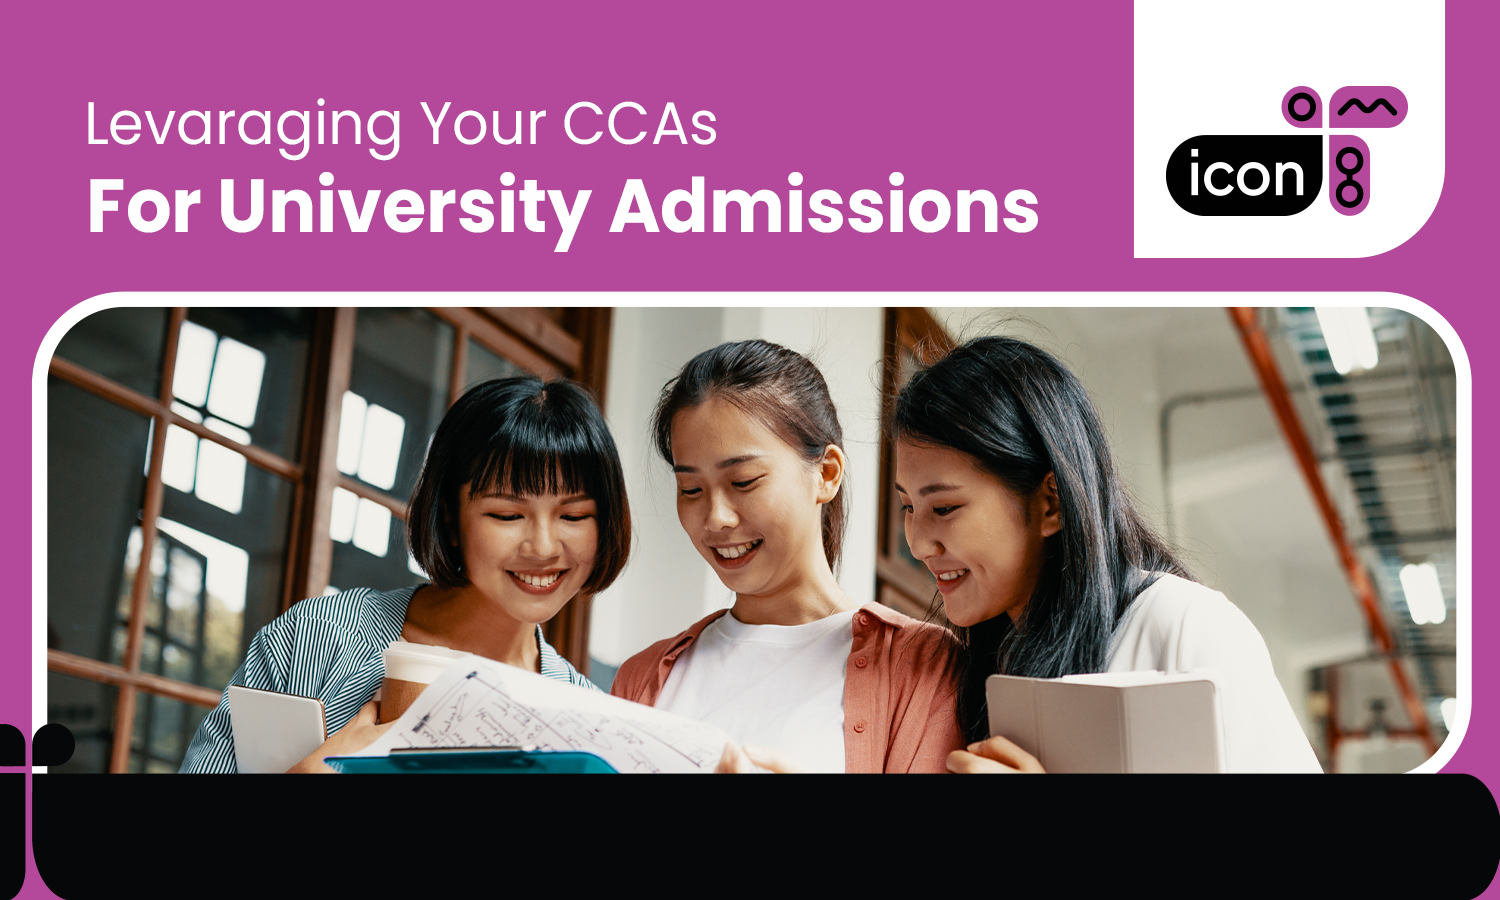 How to leverage your CCAs for university admissions?